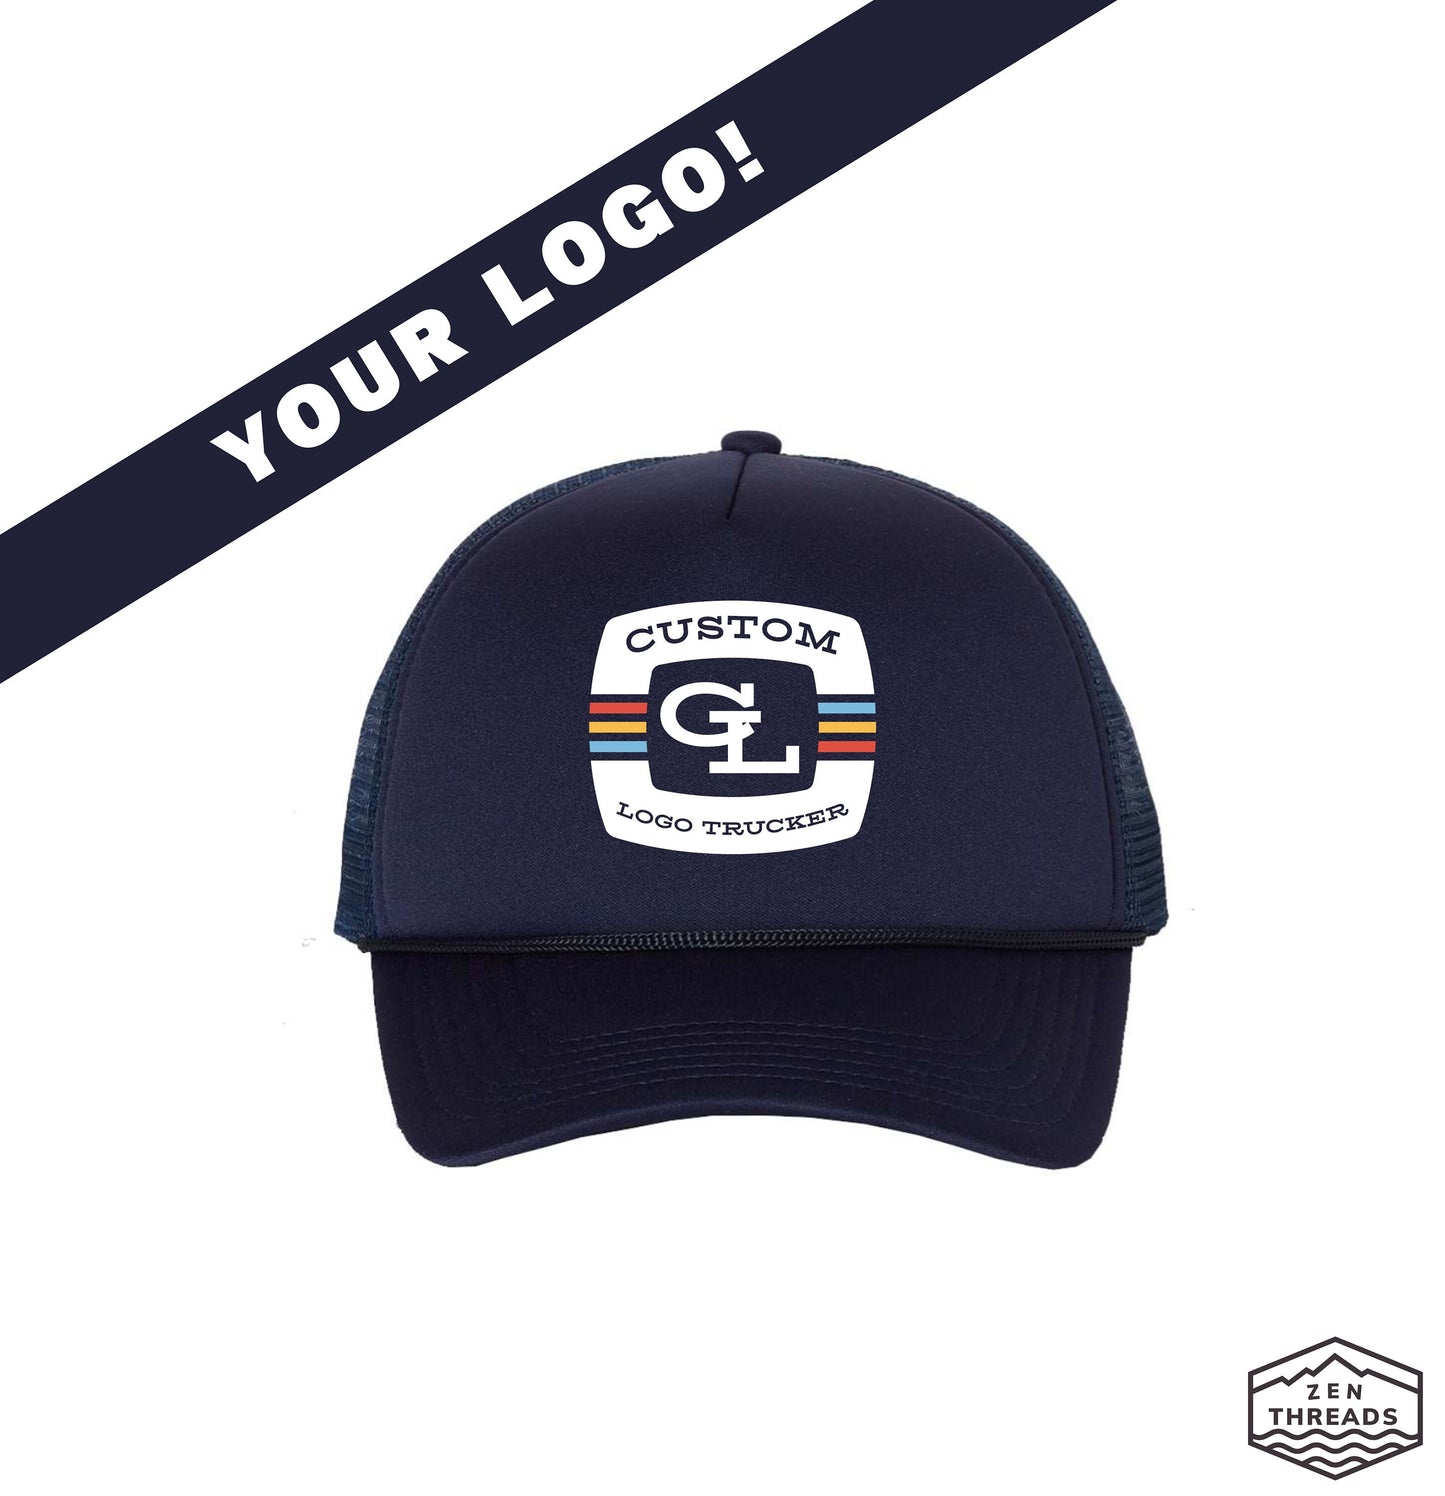 Custom Trucker Old school foam front mesh back unisex one size adjustable your logo printed full color team cap group matching wholesale